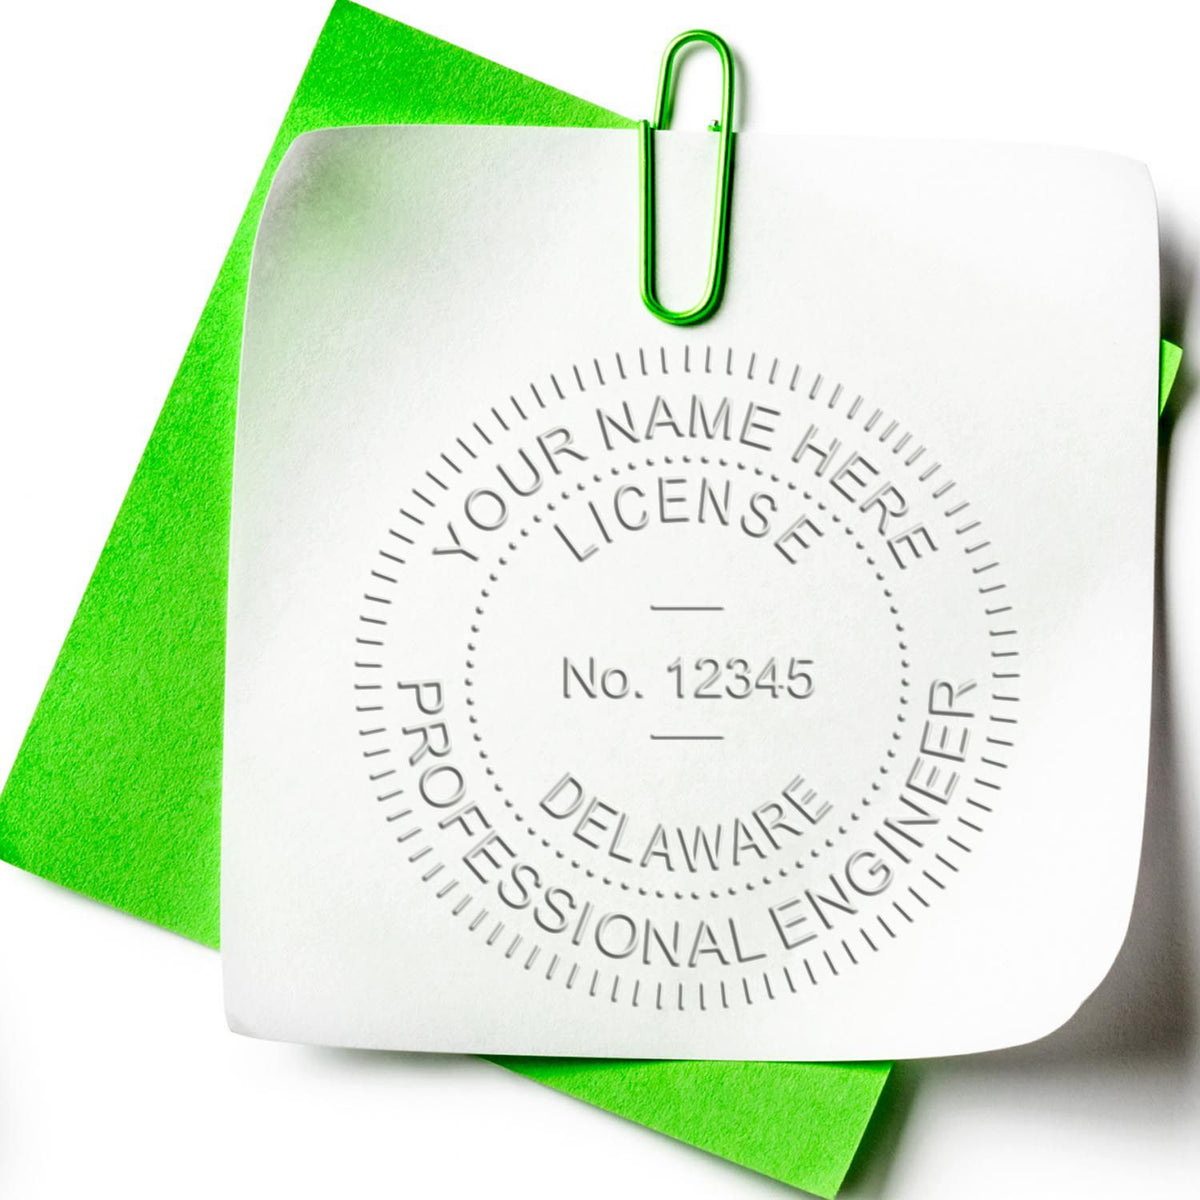 A stamped impression of the Soft Delaware Professional Engineer Seal in this stylish lifestyle photo, setting the tone for a unique and personalized product.